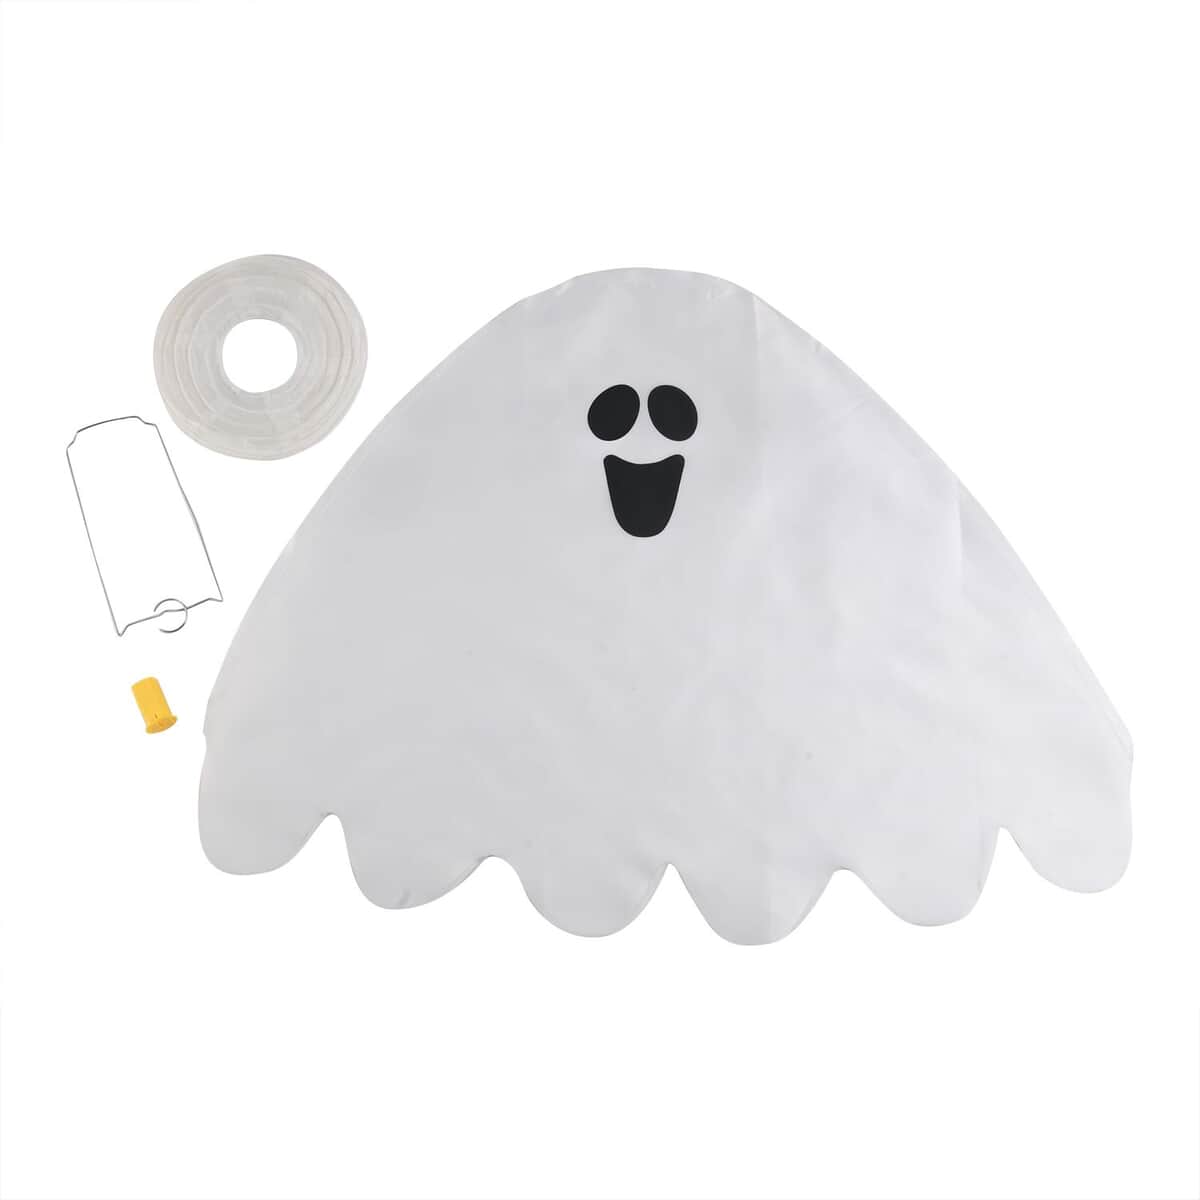 Halloween- 18 Inches Colorchange Light-up Hanging Paper Lantern Ghost image number 5